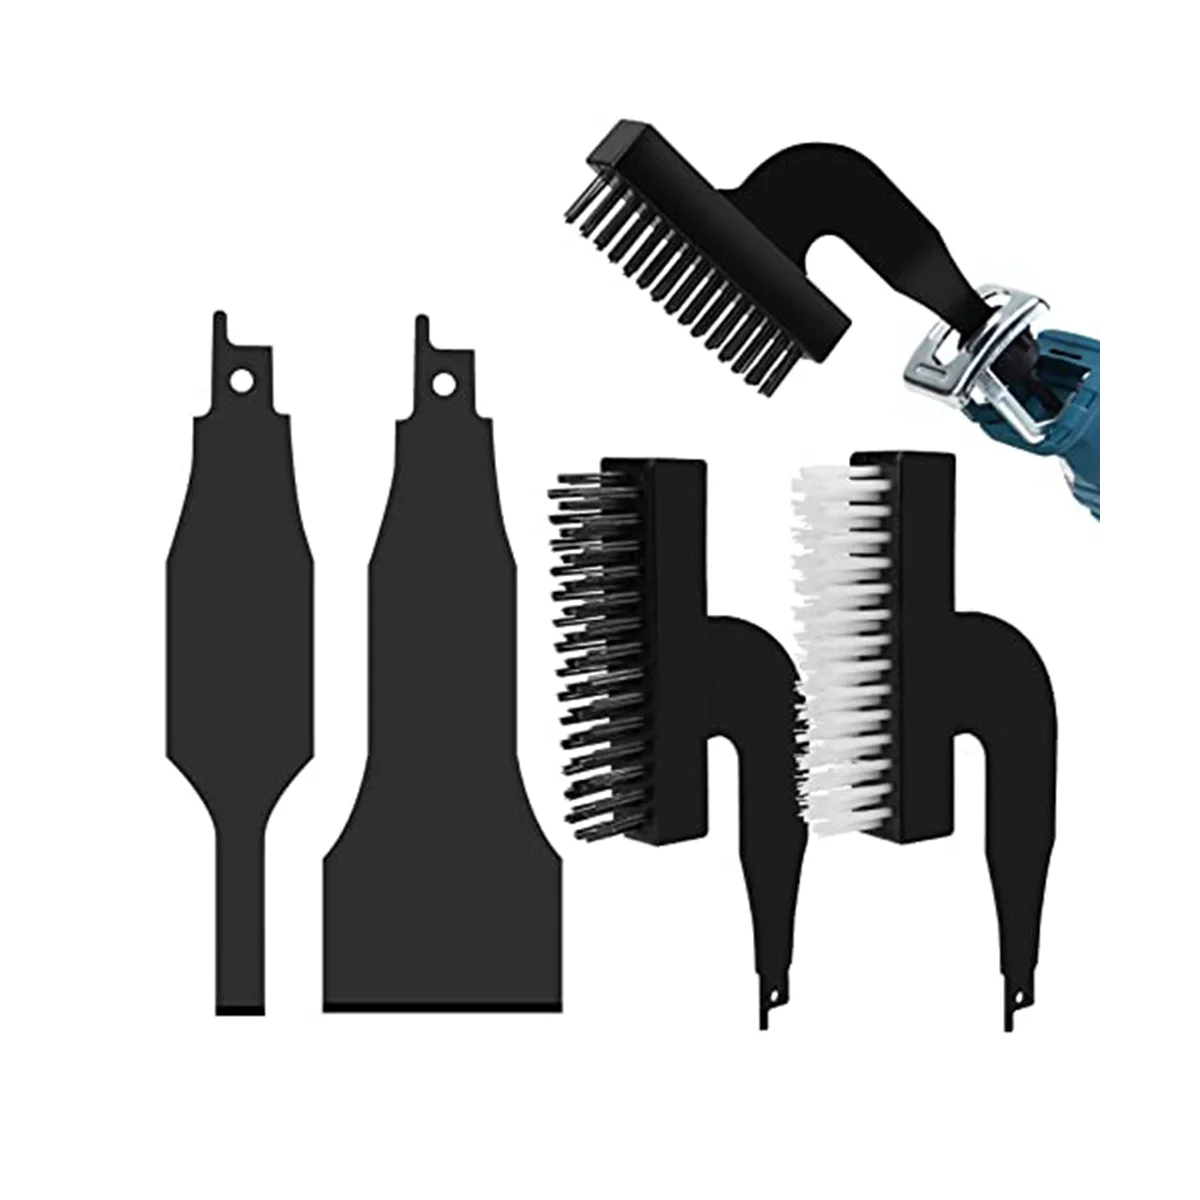 

Reciprocating Saw Scraper Blade Set, Black Reciprotools Attachments and Adapters for Reciprocating Saws, 4-Piece